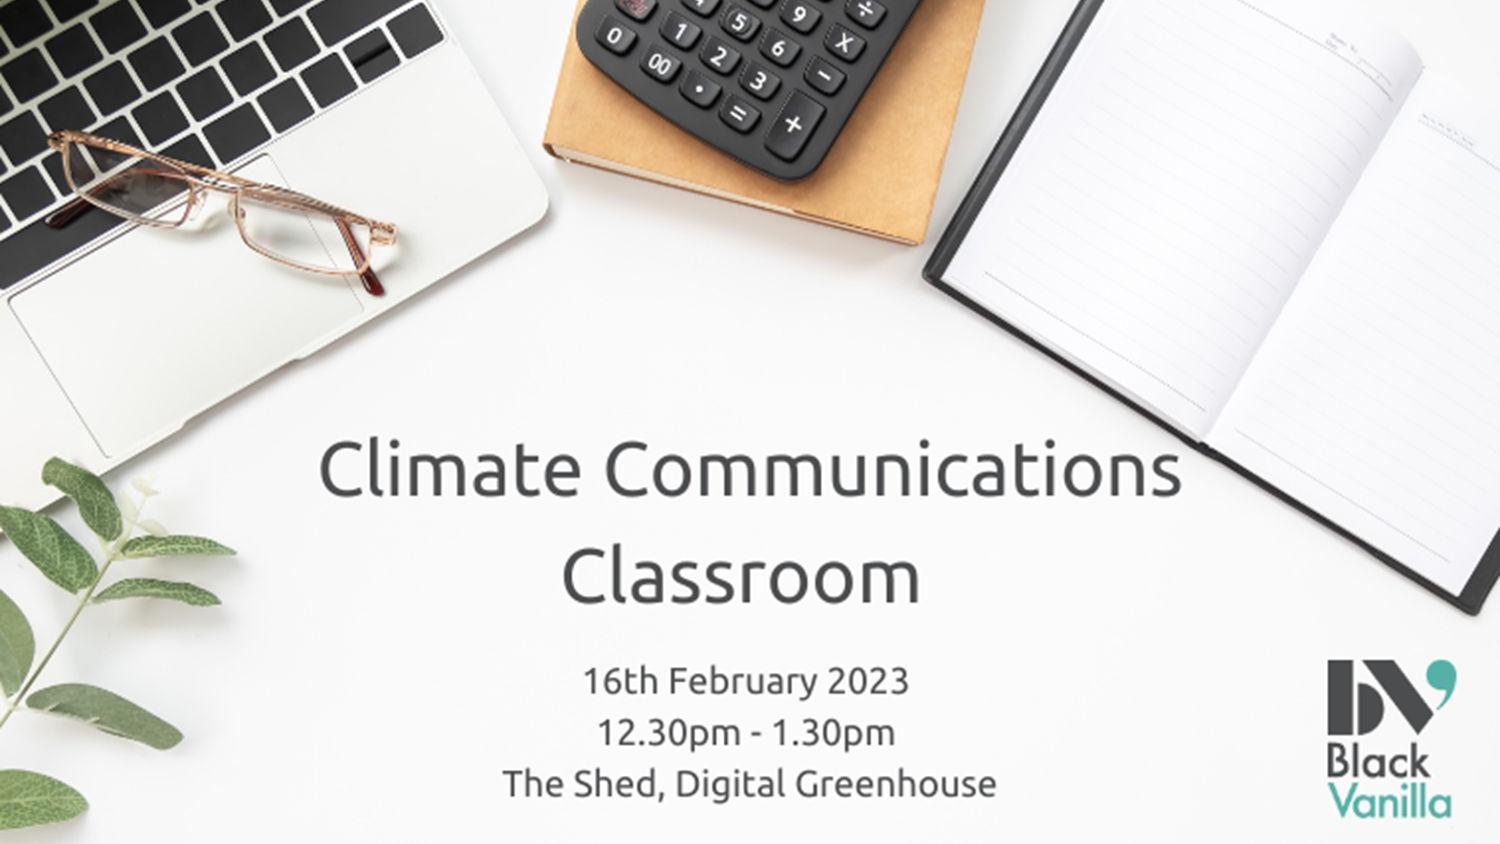 Climate communications event